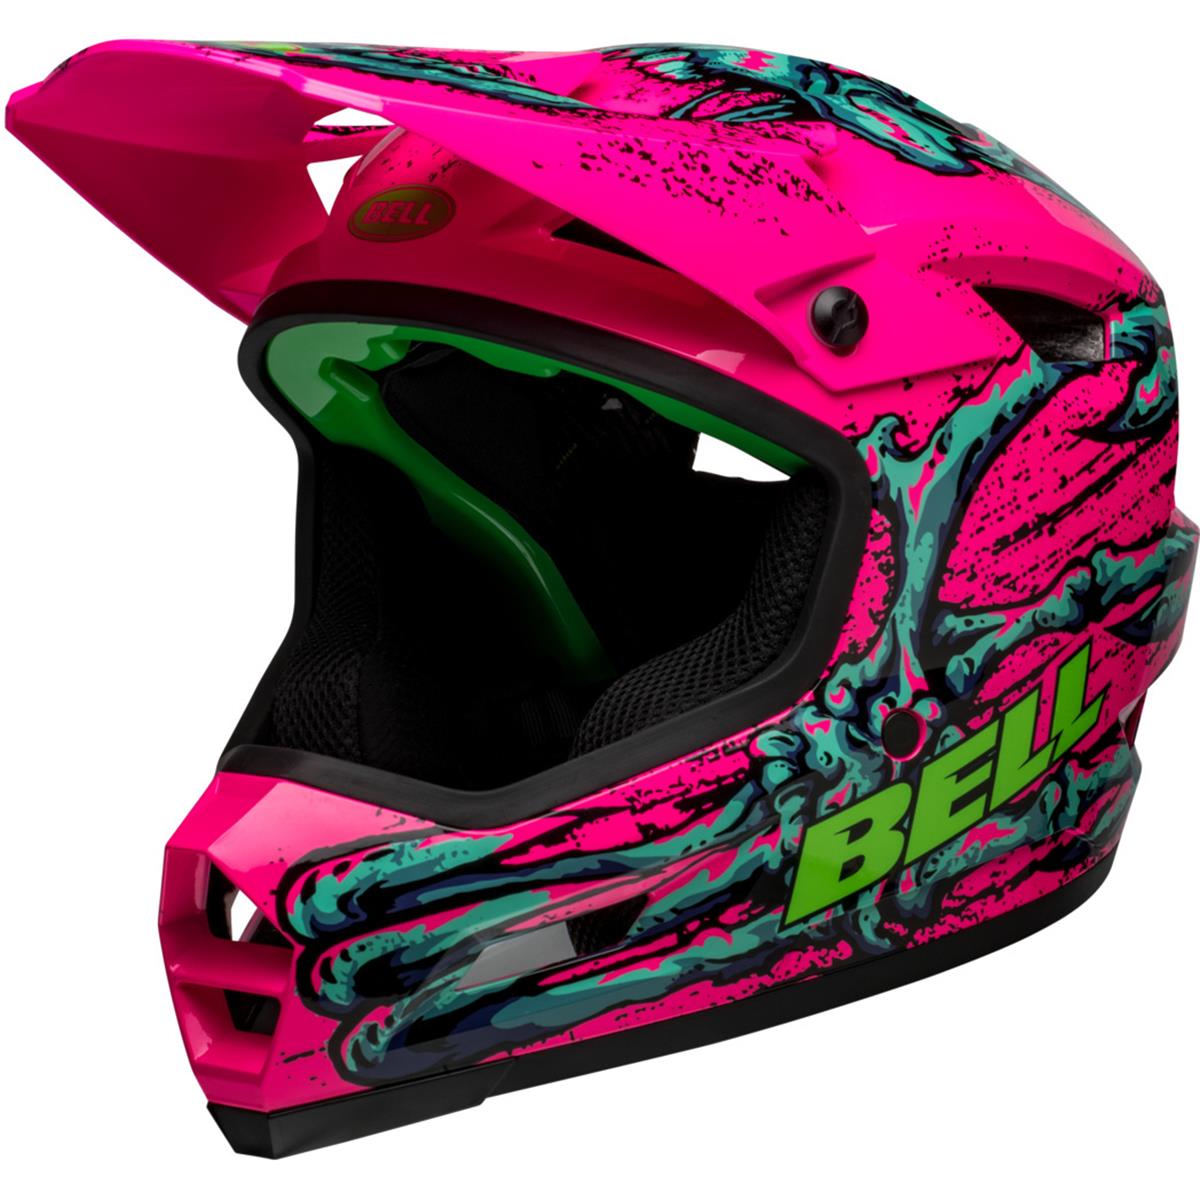 Bell Casco MTB Downhill Sanction 2 DLX MIPS Testa d'osso rosa lucido/turchese